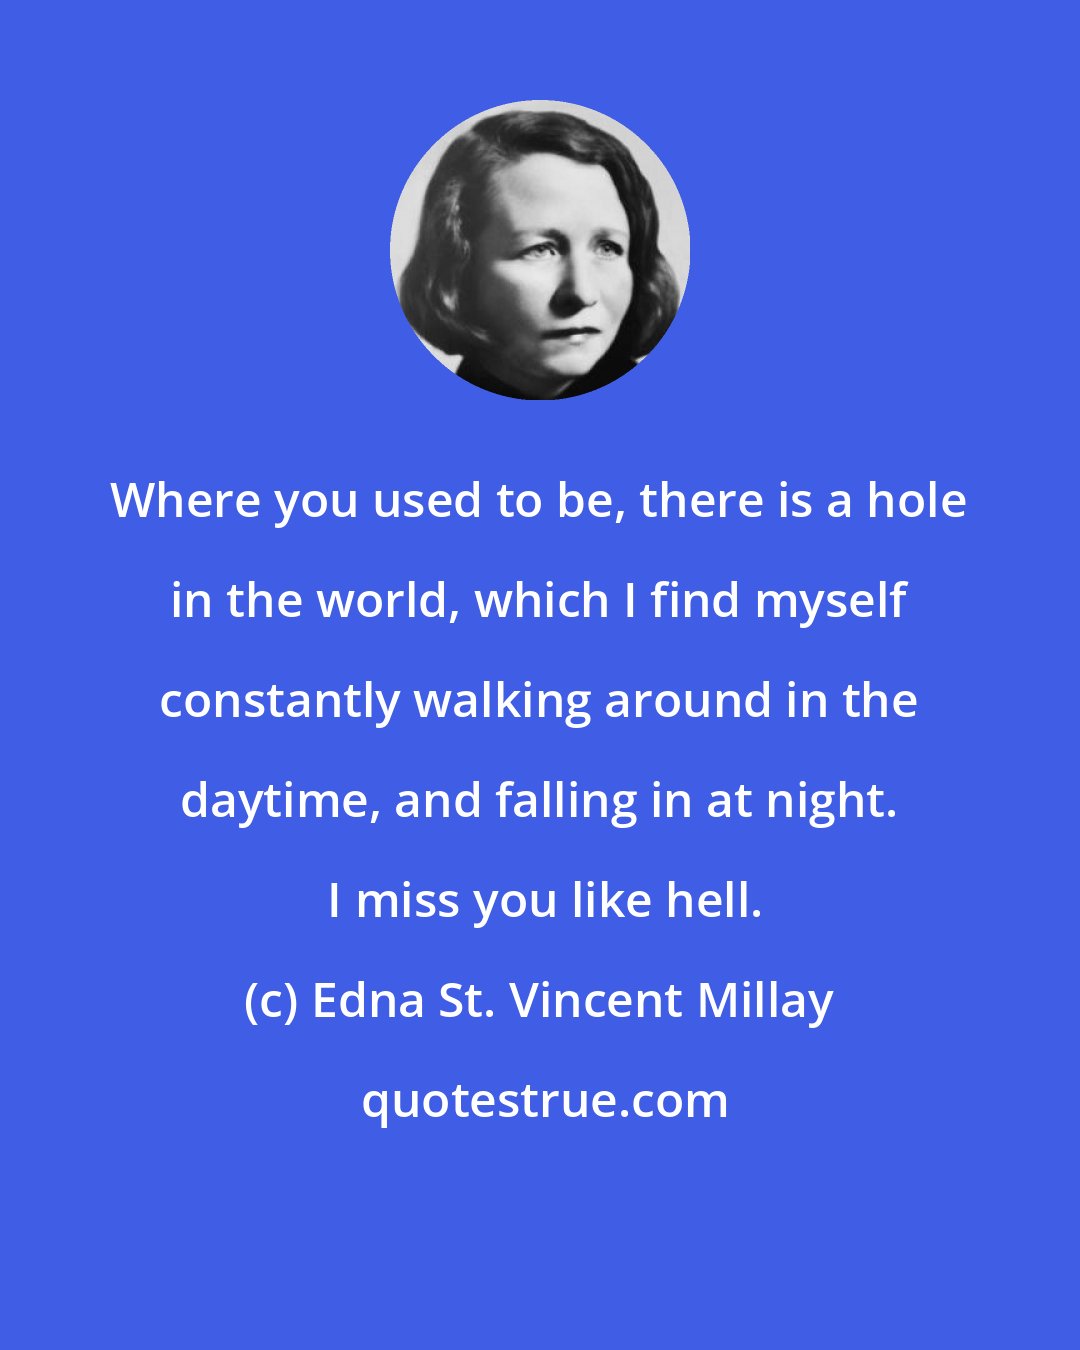 Edna St. Vincent Millay: Where you used to be, there is a hole in the world, which I find myself constantly walking around in the daytime, and falling in at night.  I miss you like hell.